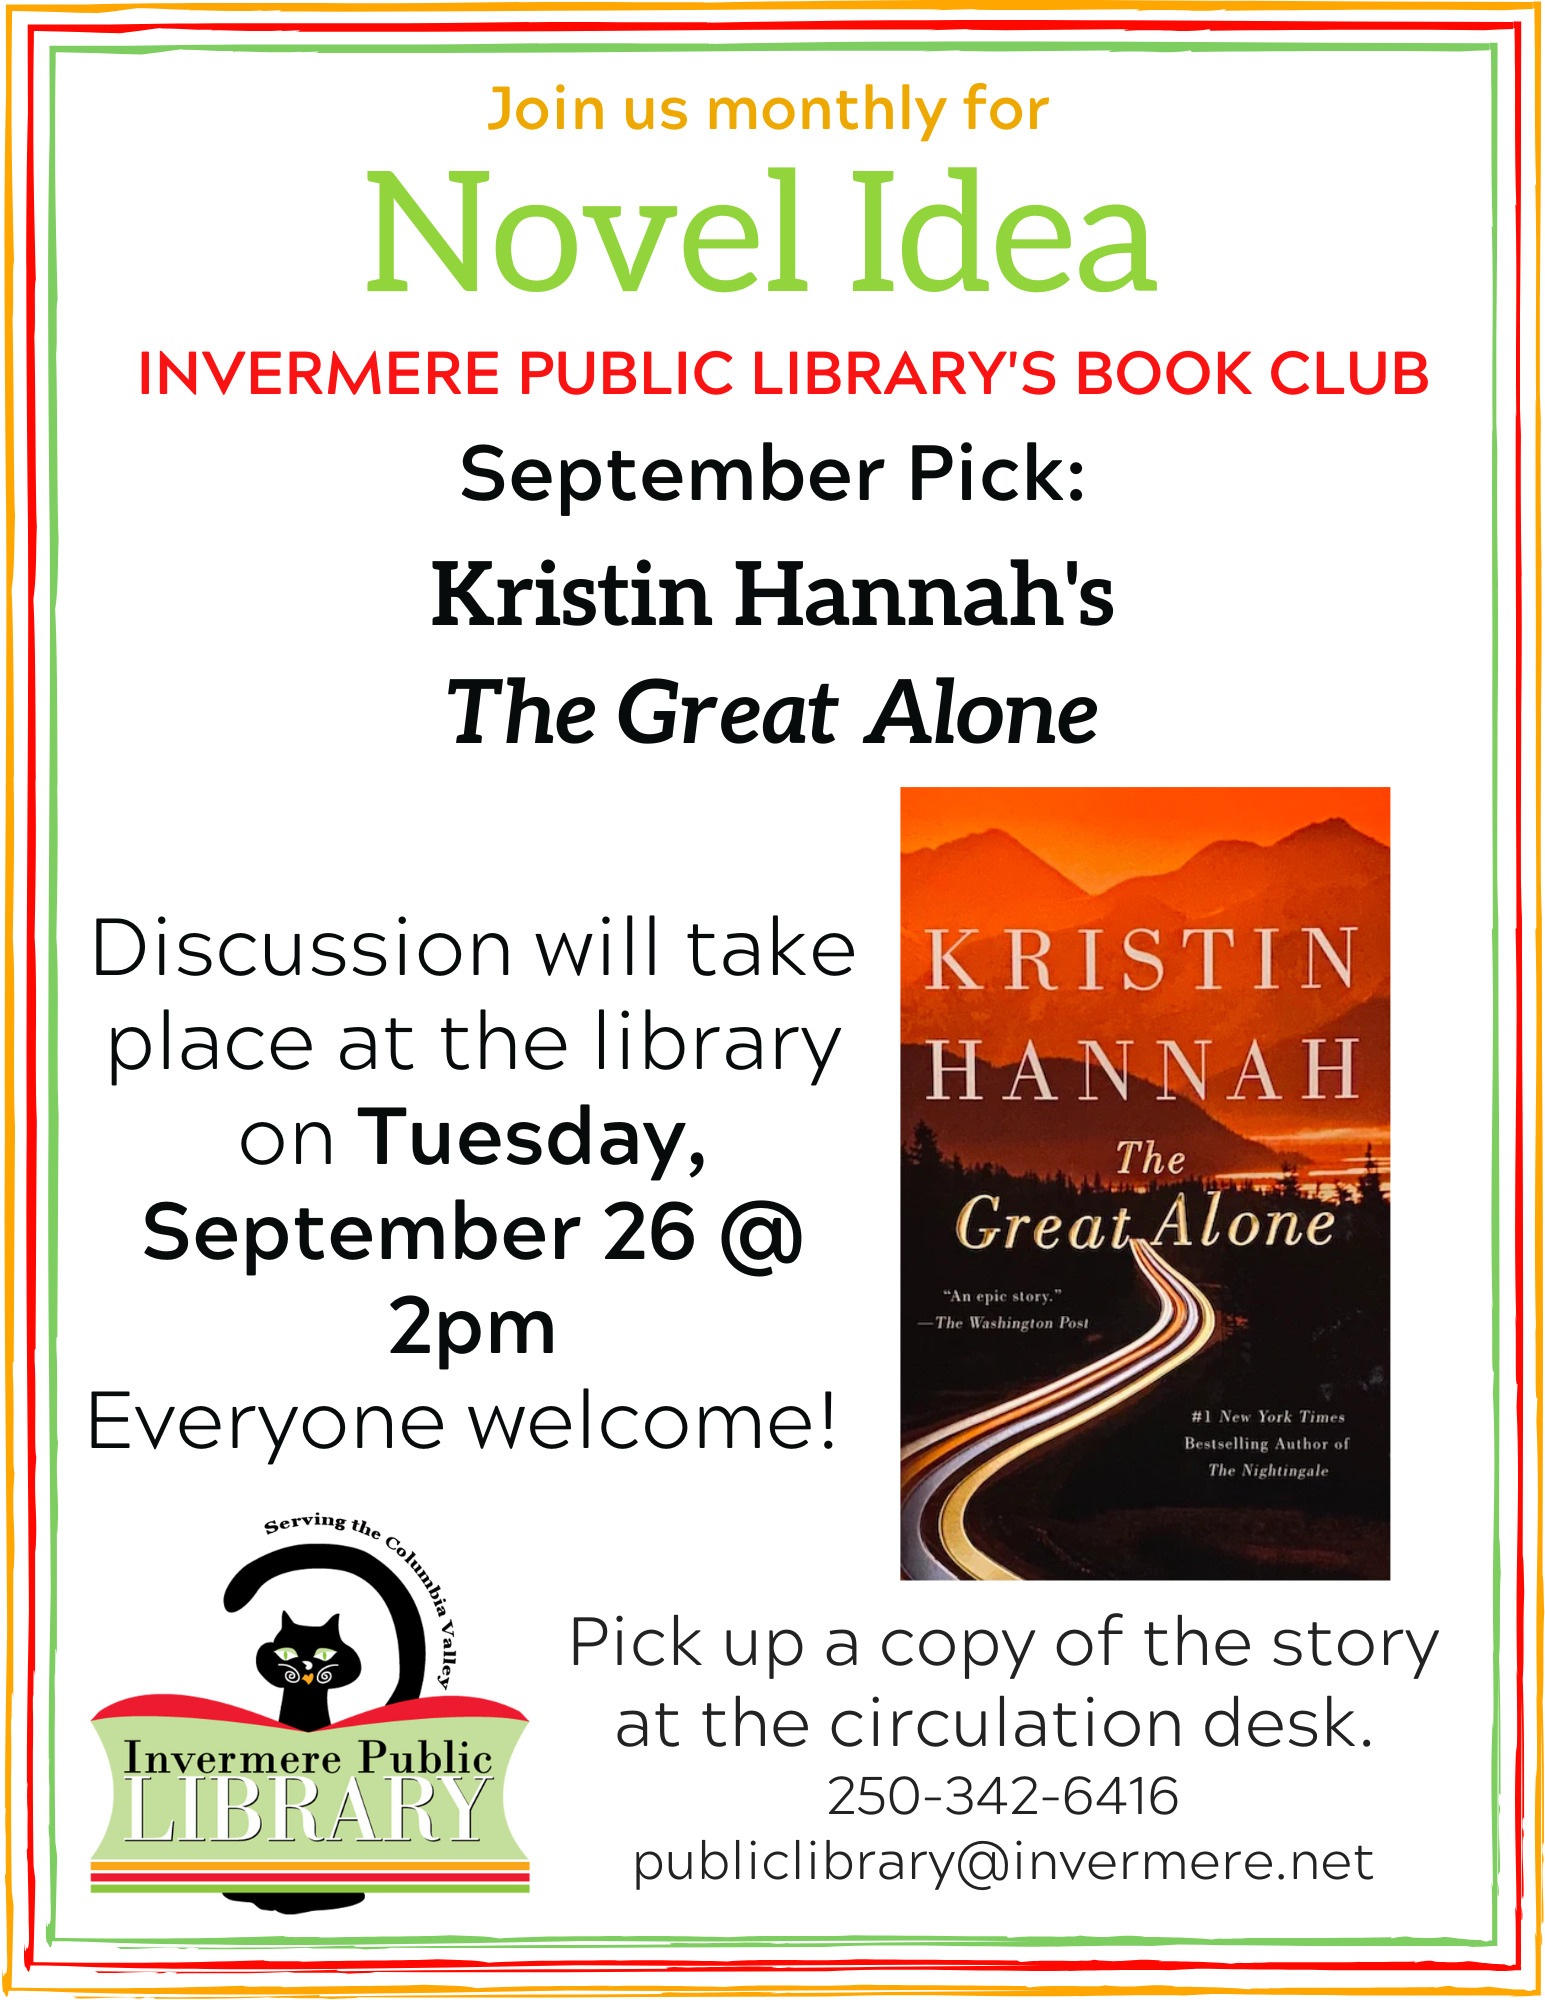 Poster that reads "Join us Monthly for Novel Idea, Invermere Public Library's Book Club. September Pick: Kristin Hannah's The Great Alone. Discussion takes place at the library on Tuesday, September 26 at 2pm. Everyone welcome. Pick up a copy of the book at the circulation desk. Image of the book cover on the right side of poster and IPL logo on bottom left.